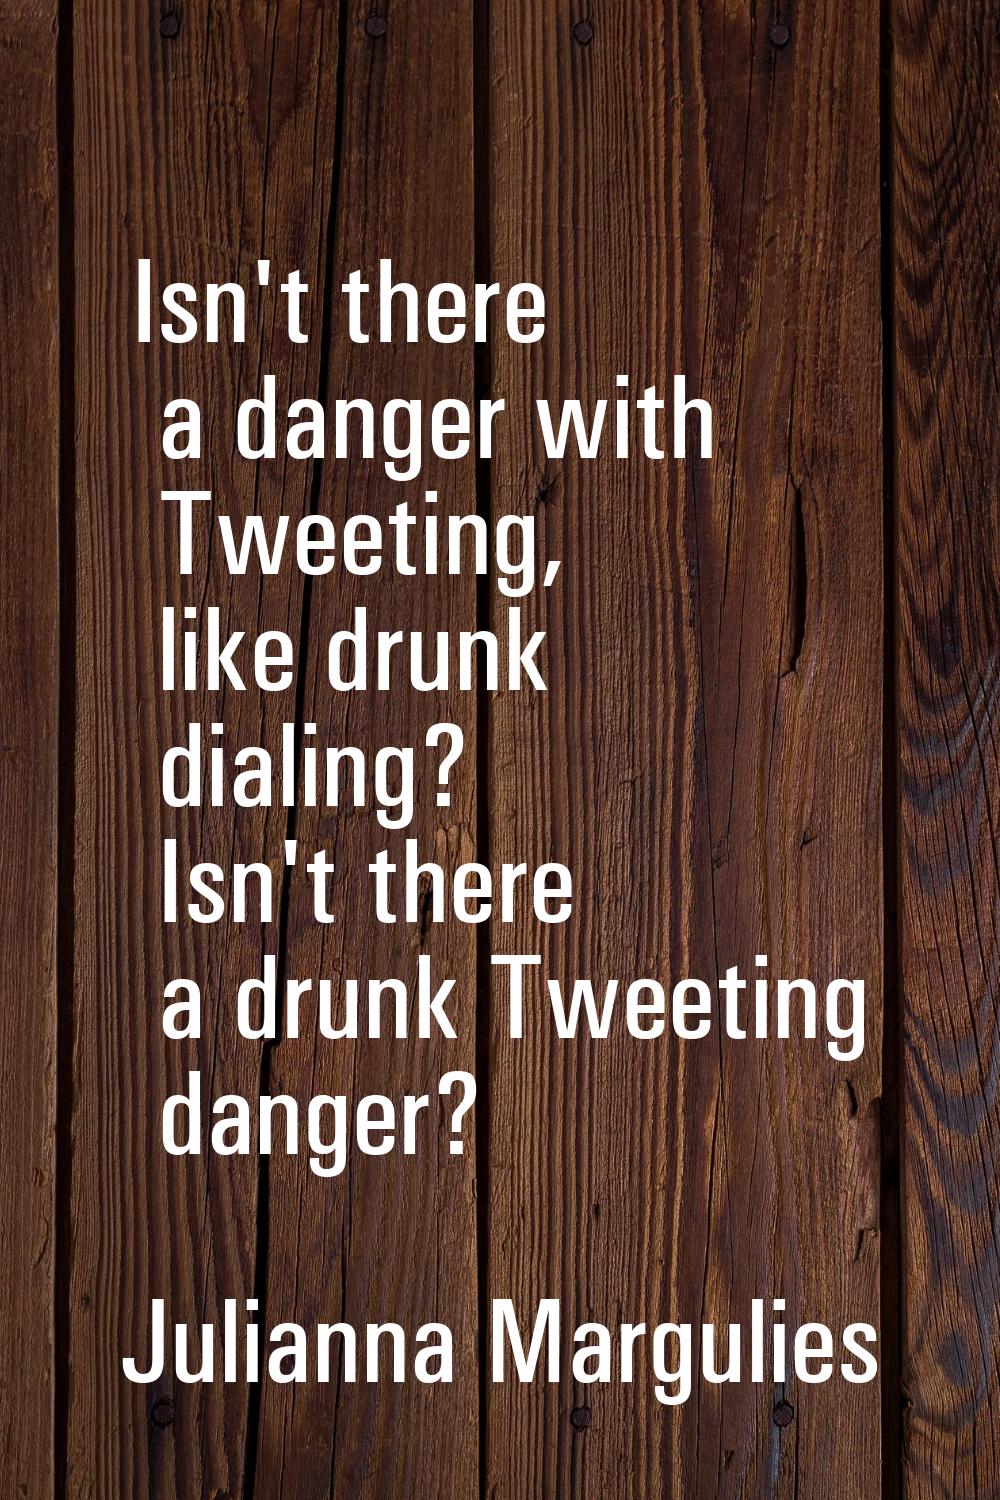 Isn't there a danger with Tweeting, like drunk dialing? Isn't there a drunk Tweeting danger?